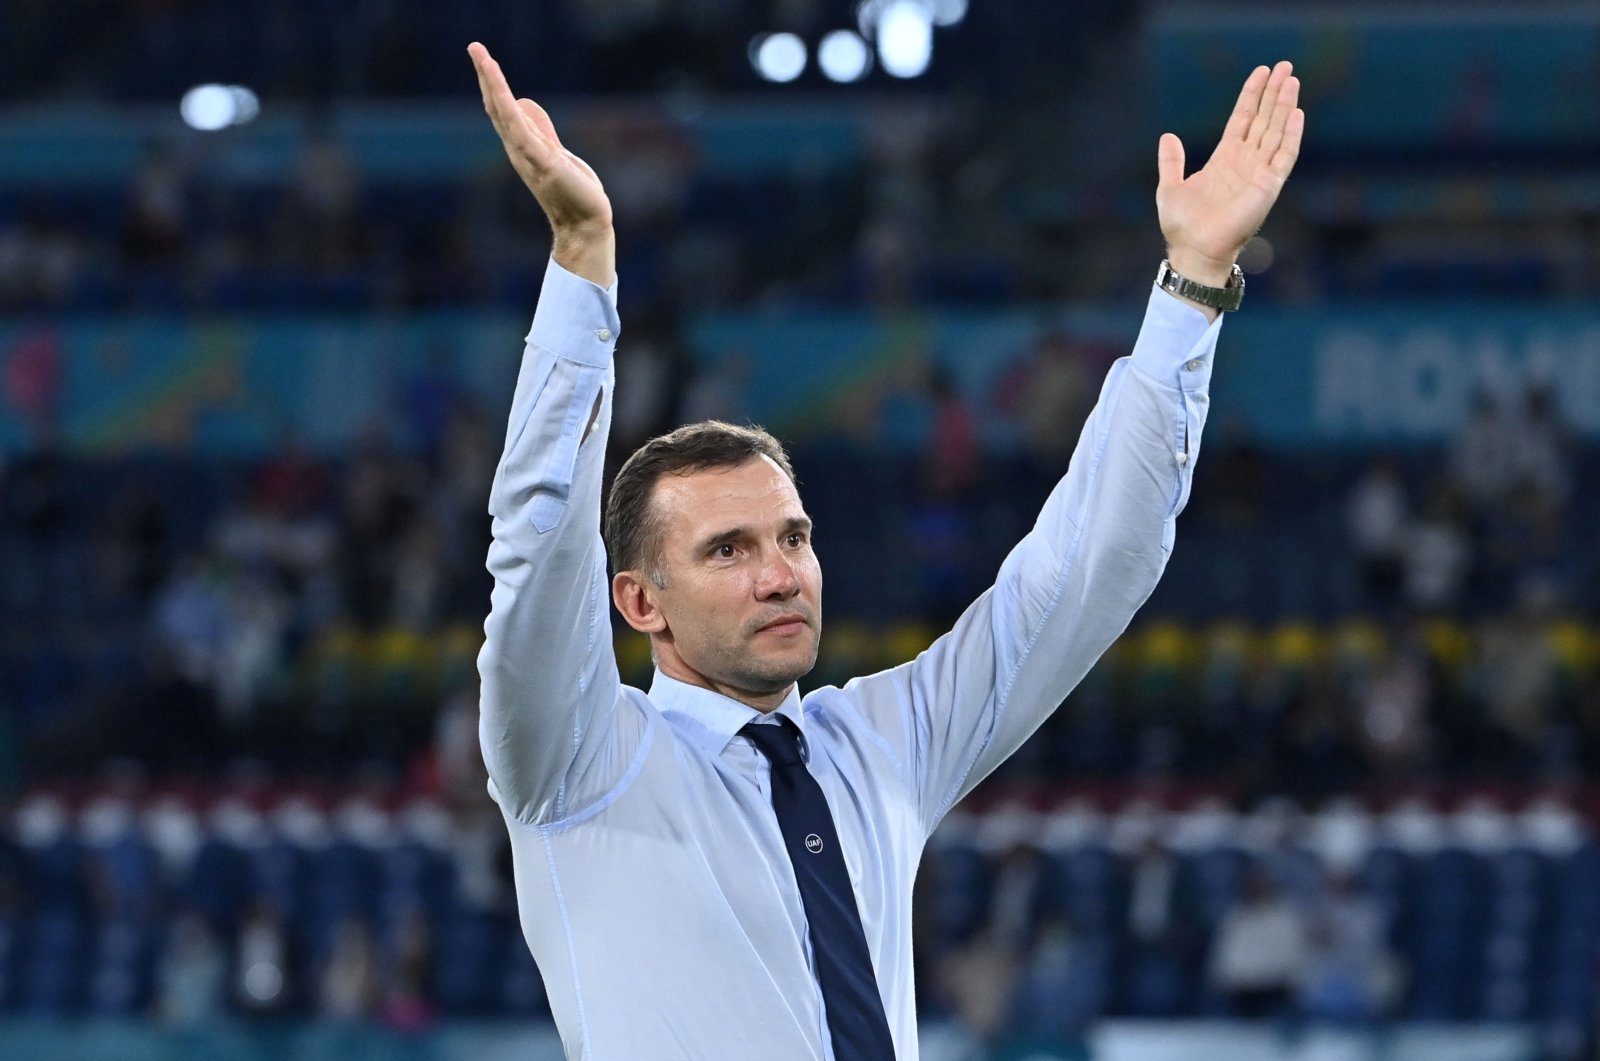 Then-Ukraine coach Andriy Shevchenko applauds after the Euro 2020 quarterfinal against England at Stadio Olimpico, Rome, Italy, July 3, 2021. (Reuters Photo)